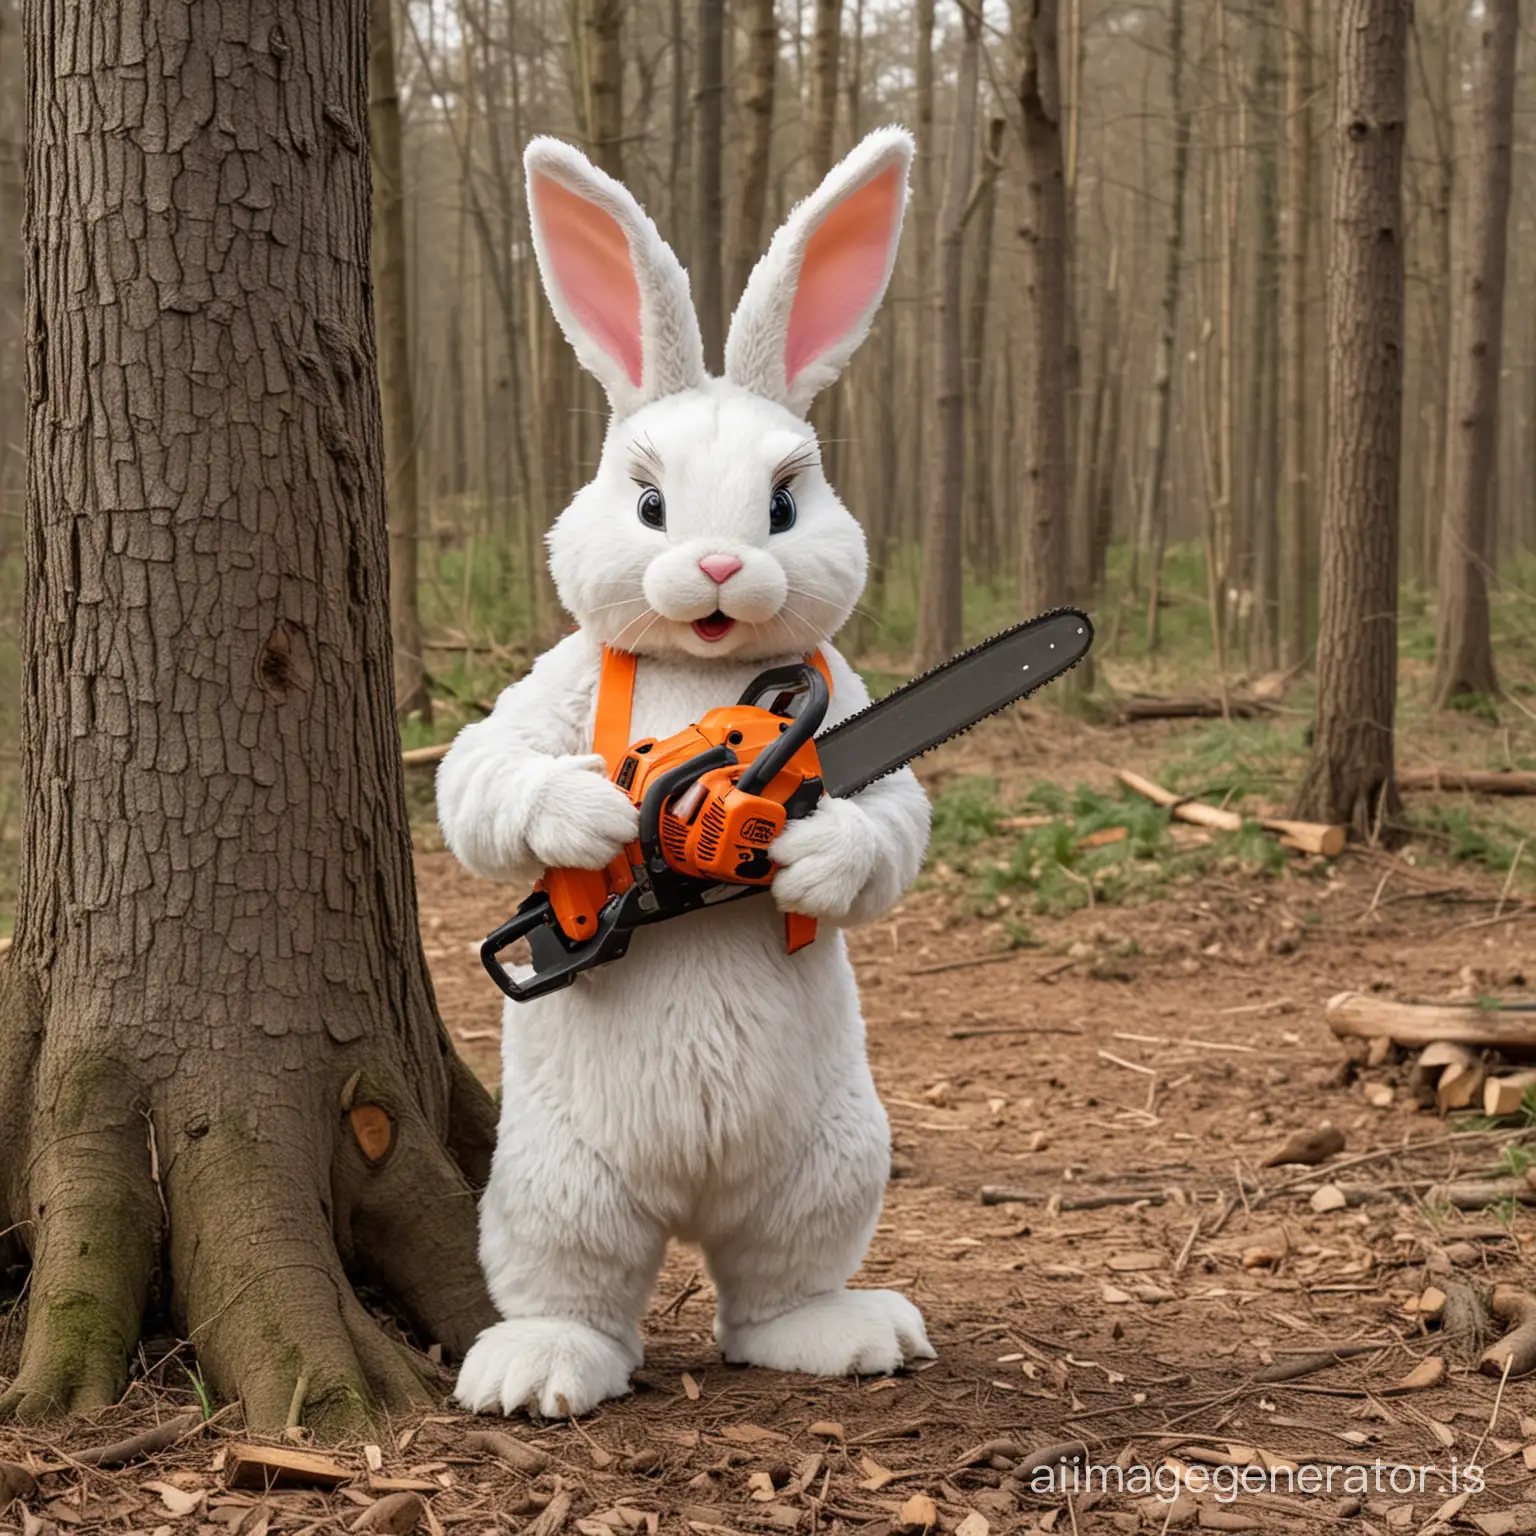 Easter bunny with chainsaw cutting down trees in the forest the chainsaw should be clearly visible